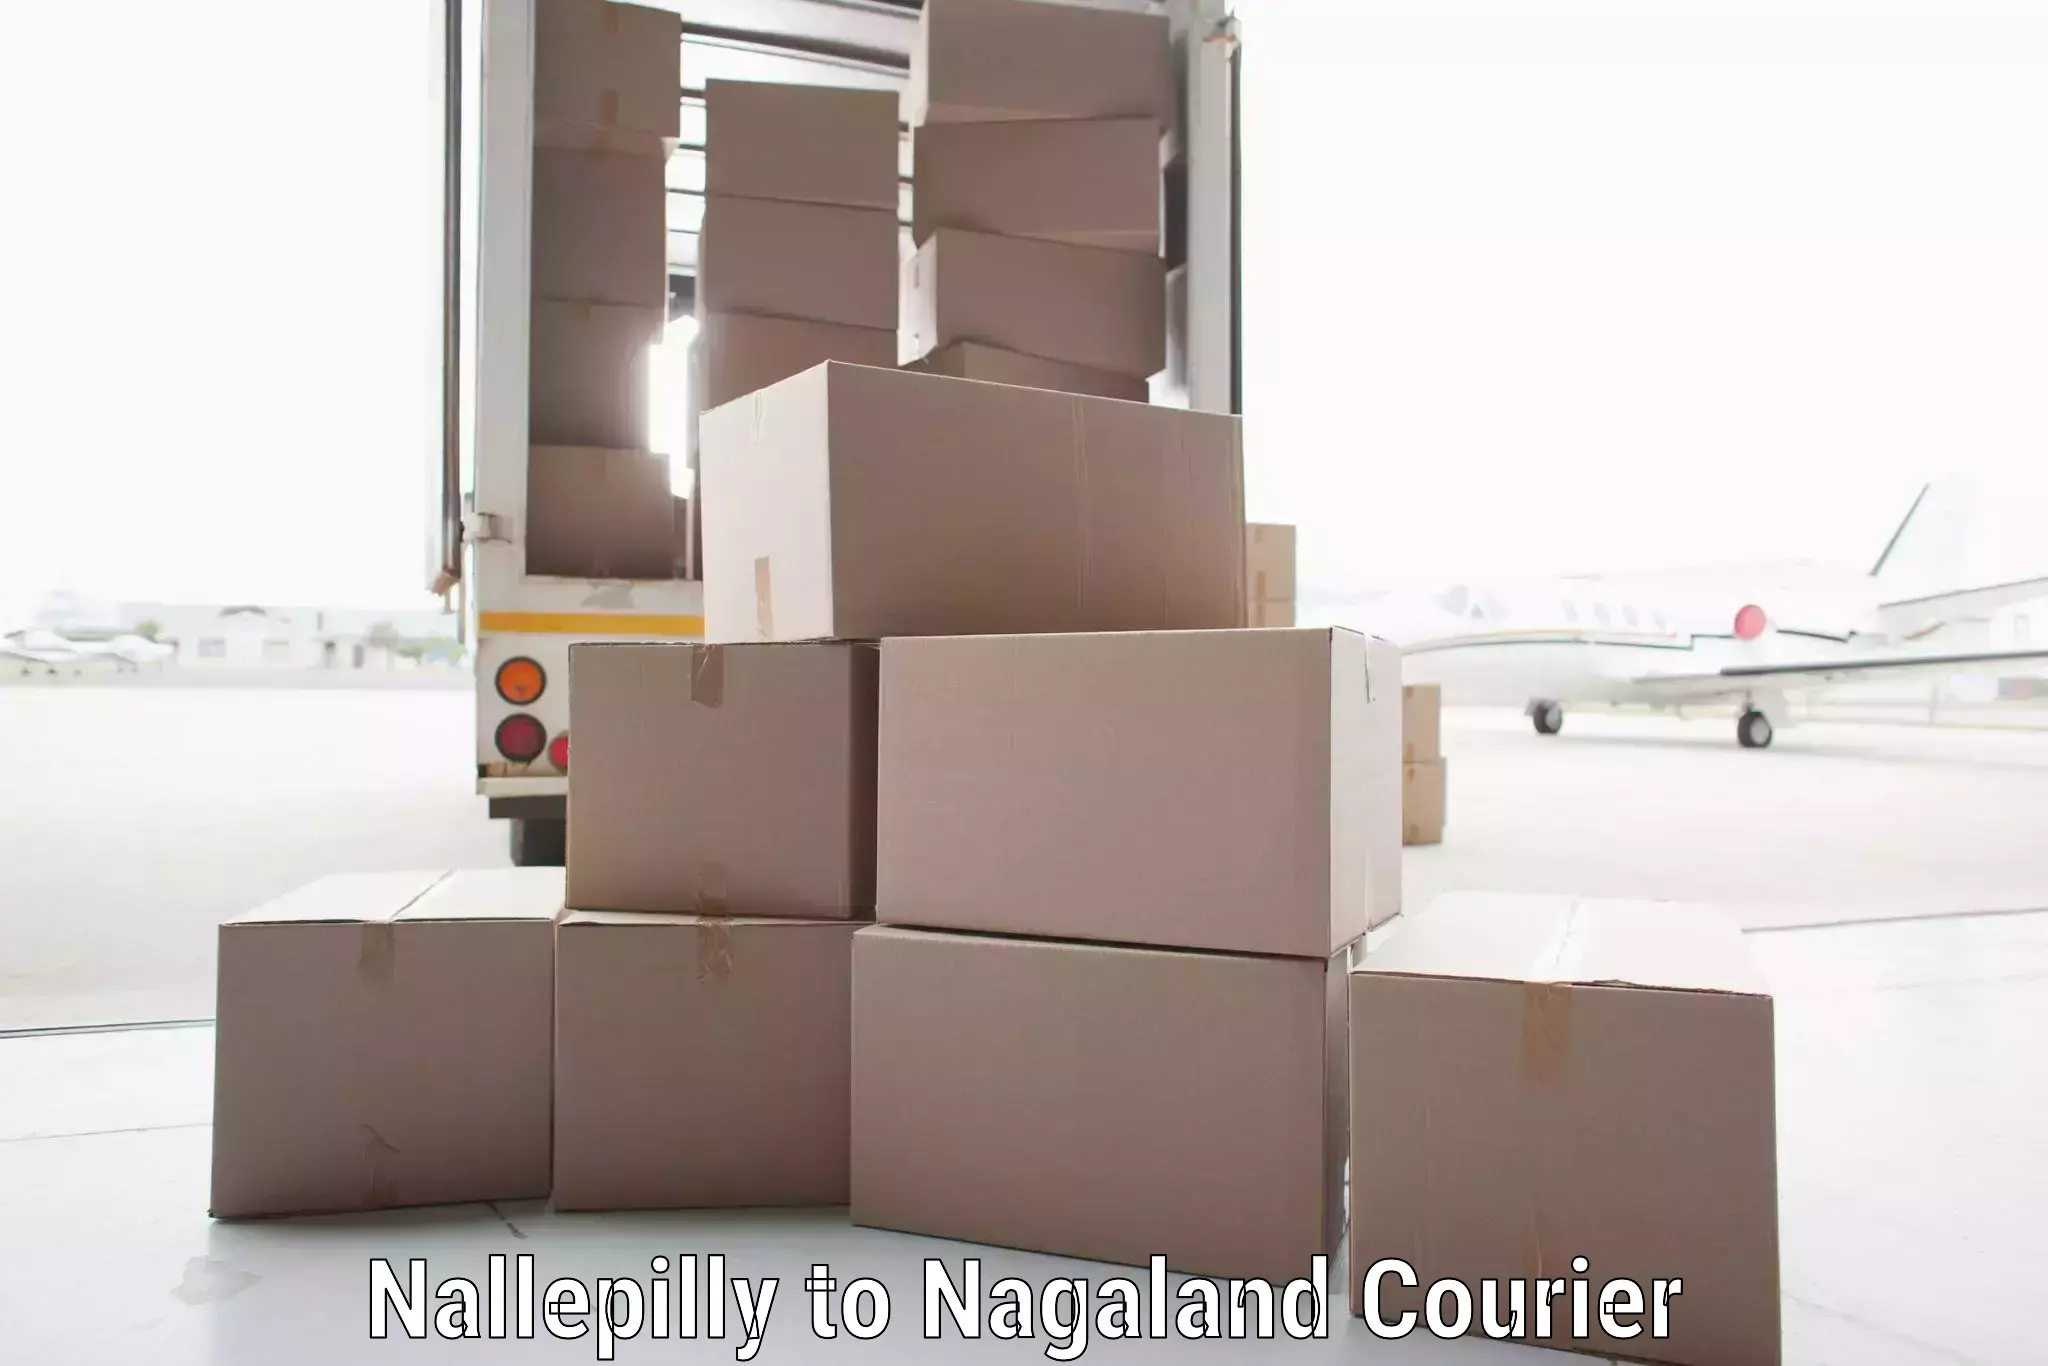 Full-service courier options Nallepilly to Nagaland